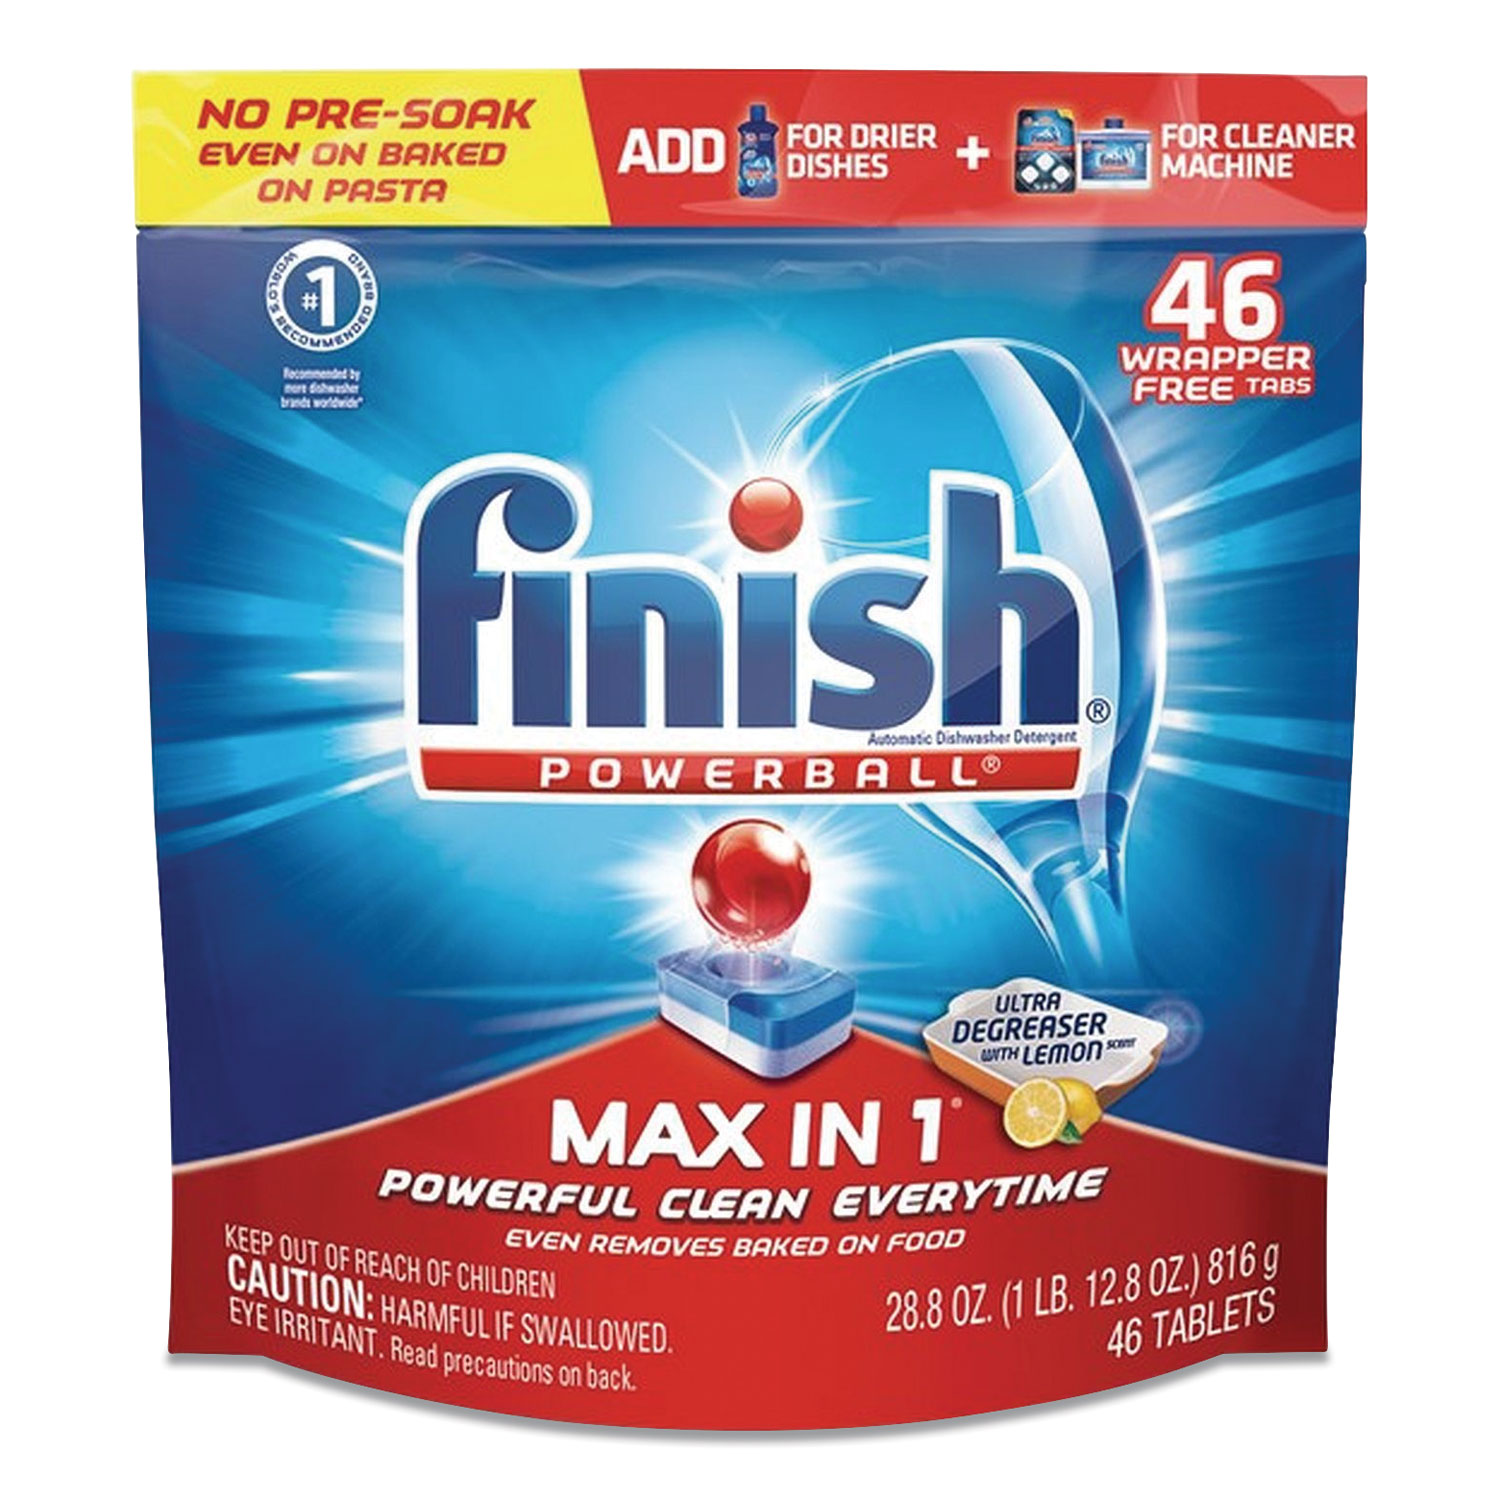  FINISH 51700-20604 Powerball Max in 1 Super Charged Ultra Degreaser Dishwasher Tabs, Lemon, Wrapper-Free, 46/Pack, 4 Packs/Carton (RAC20604CT) 